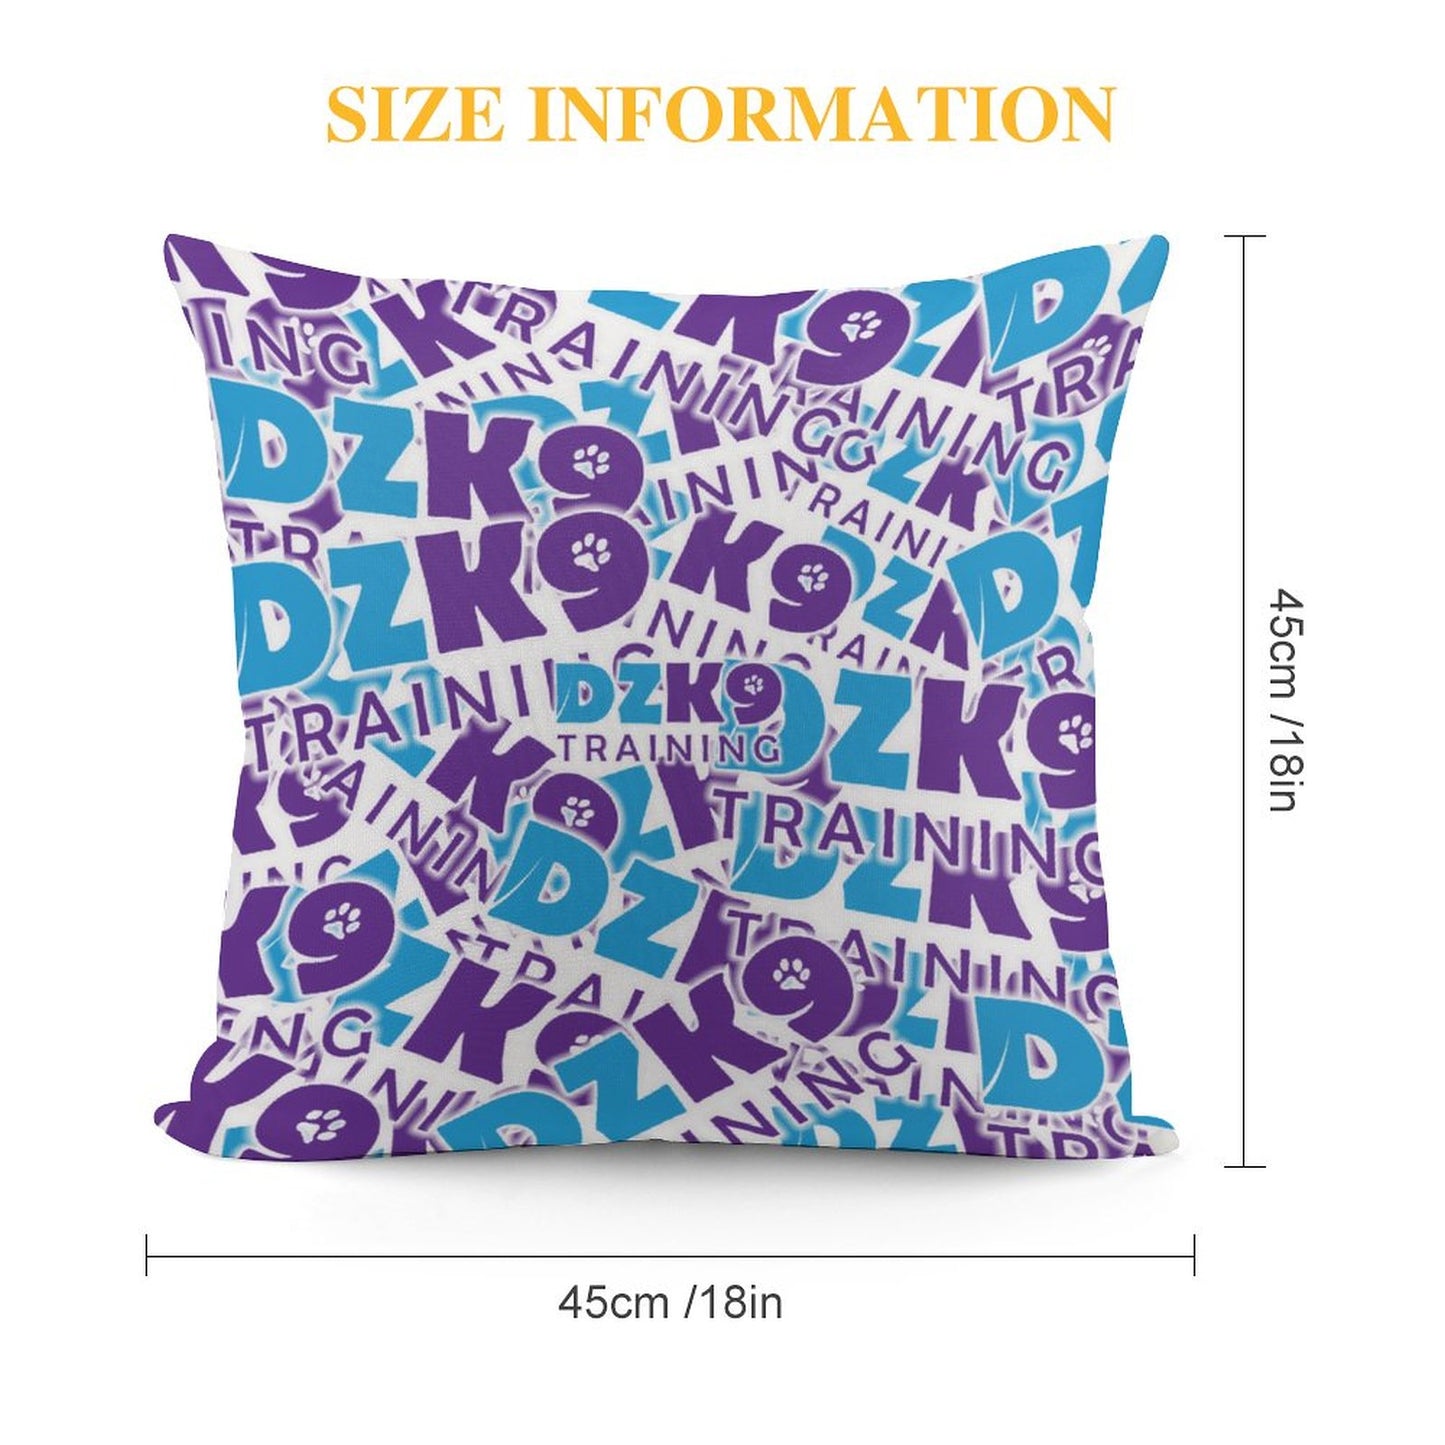 Square Plush Throw Pillow Cover (Pillow Excluded) (Dual Printing)